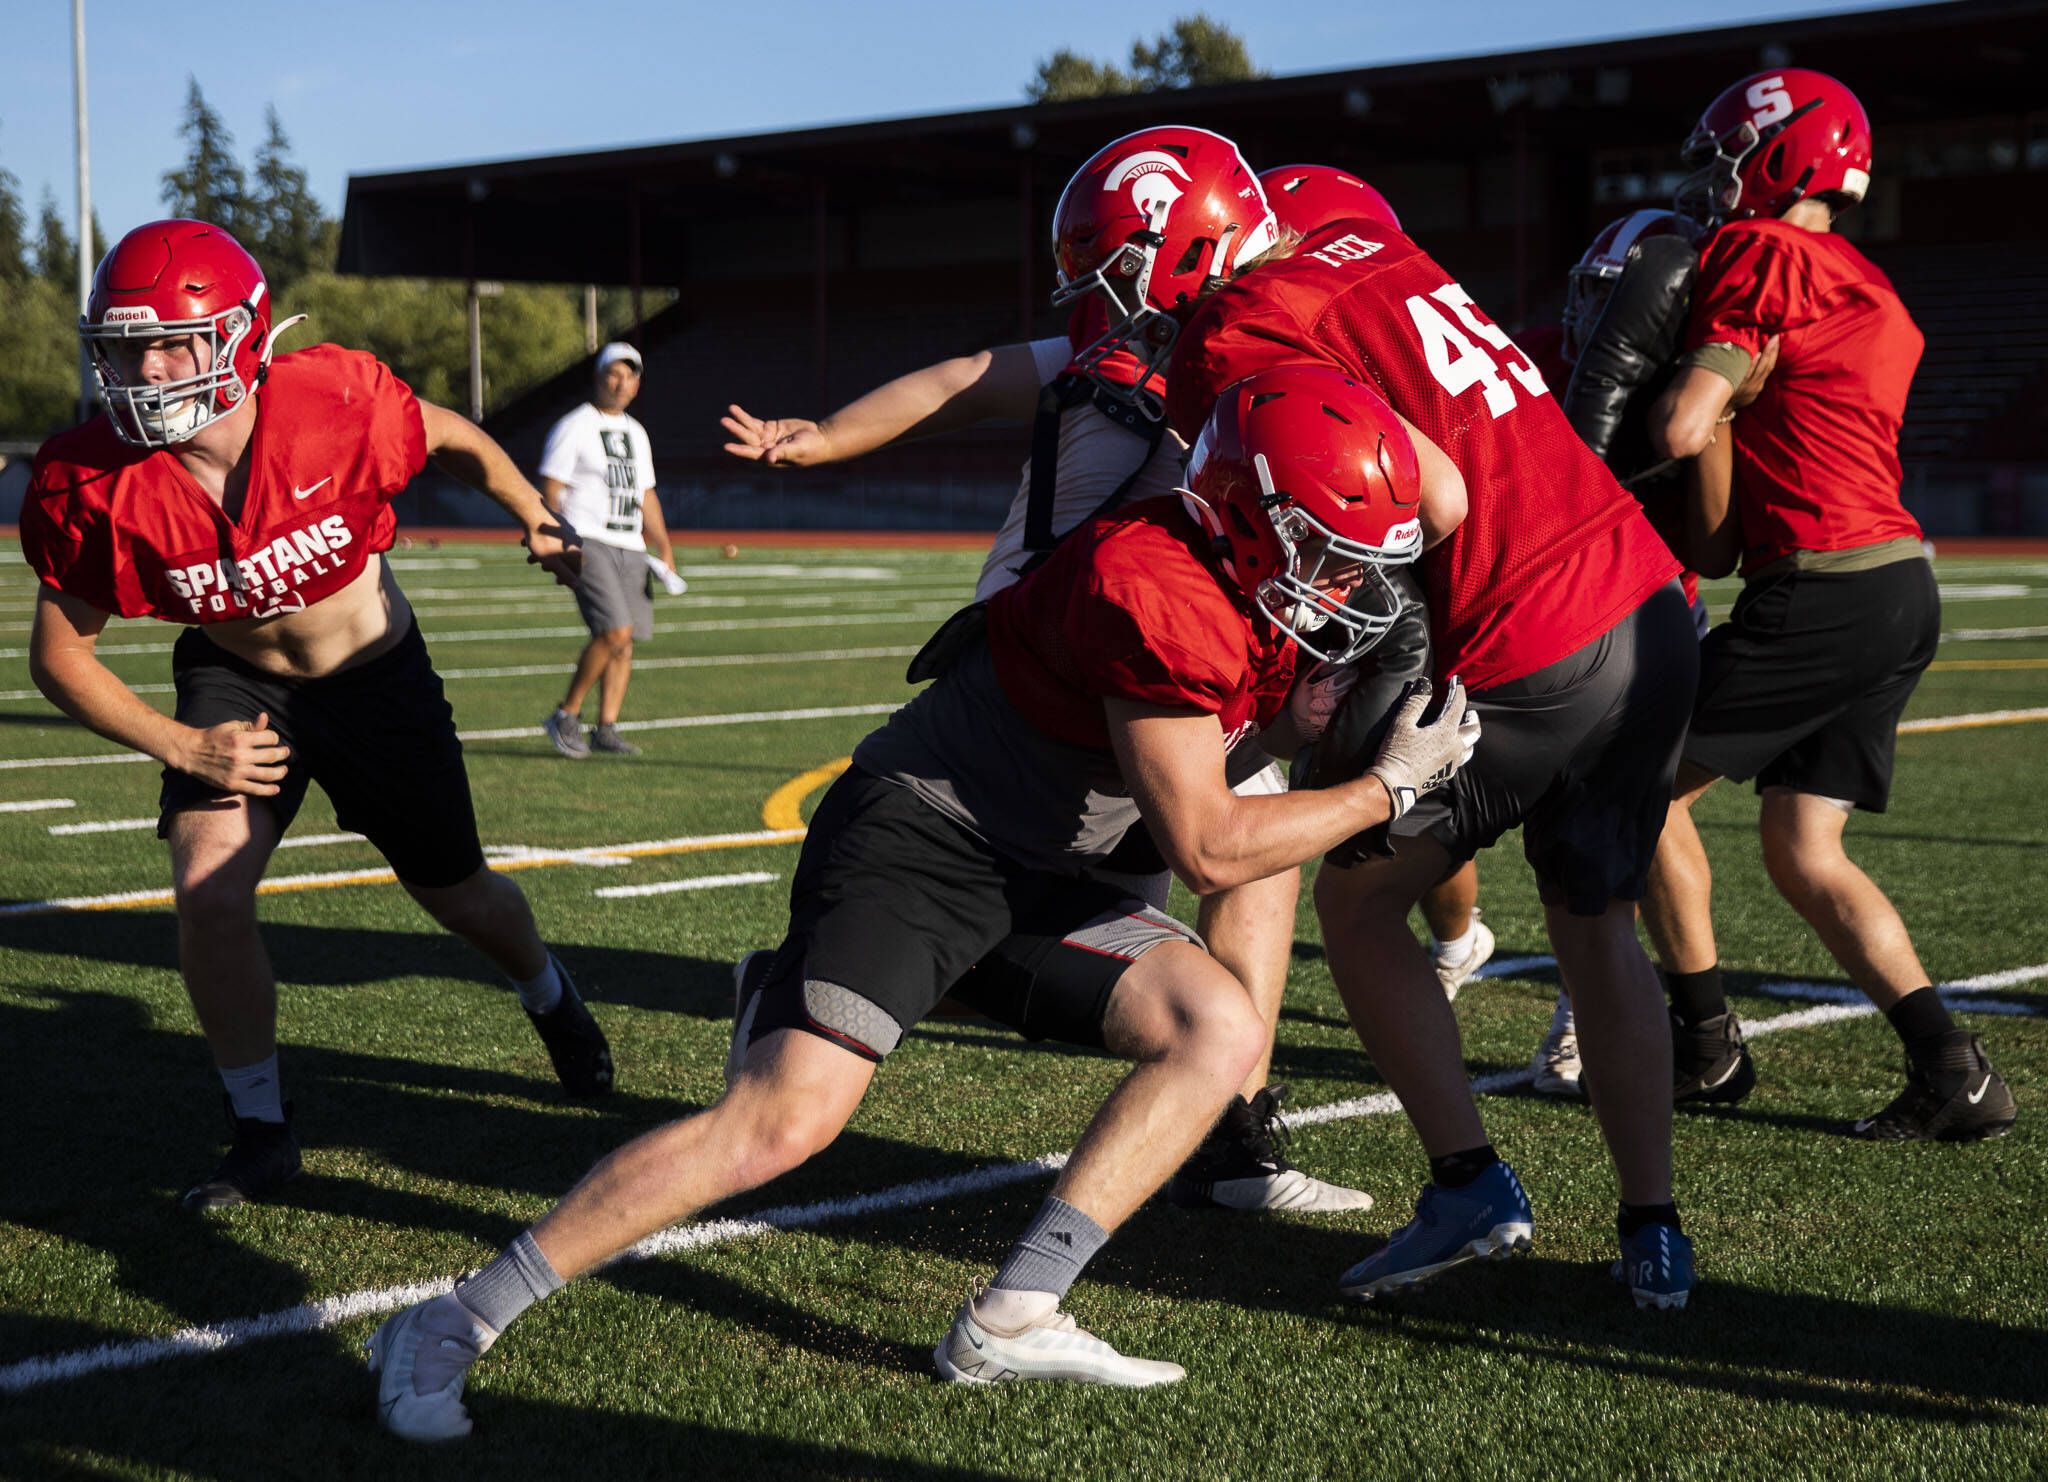 Stanwood’s Caden Caldero hits teammate Eli Fleck during practice Monday in Stanwood. The Spartans face Lakewood in a non-league game Friday. (Olivia Vanni / The Herald)